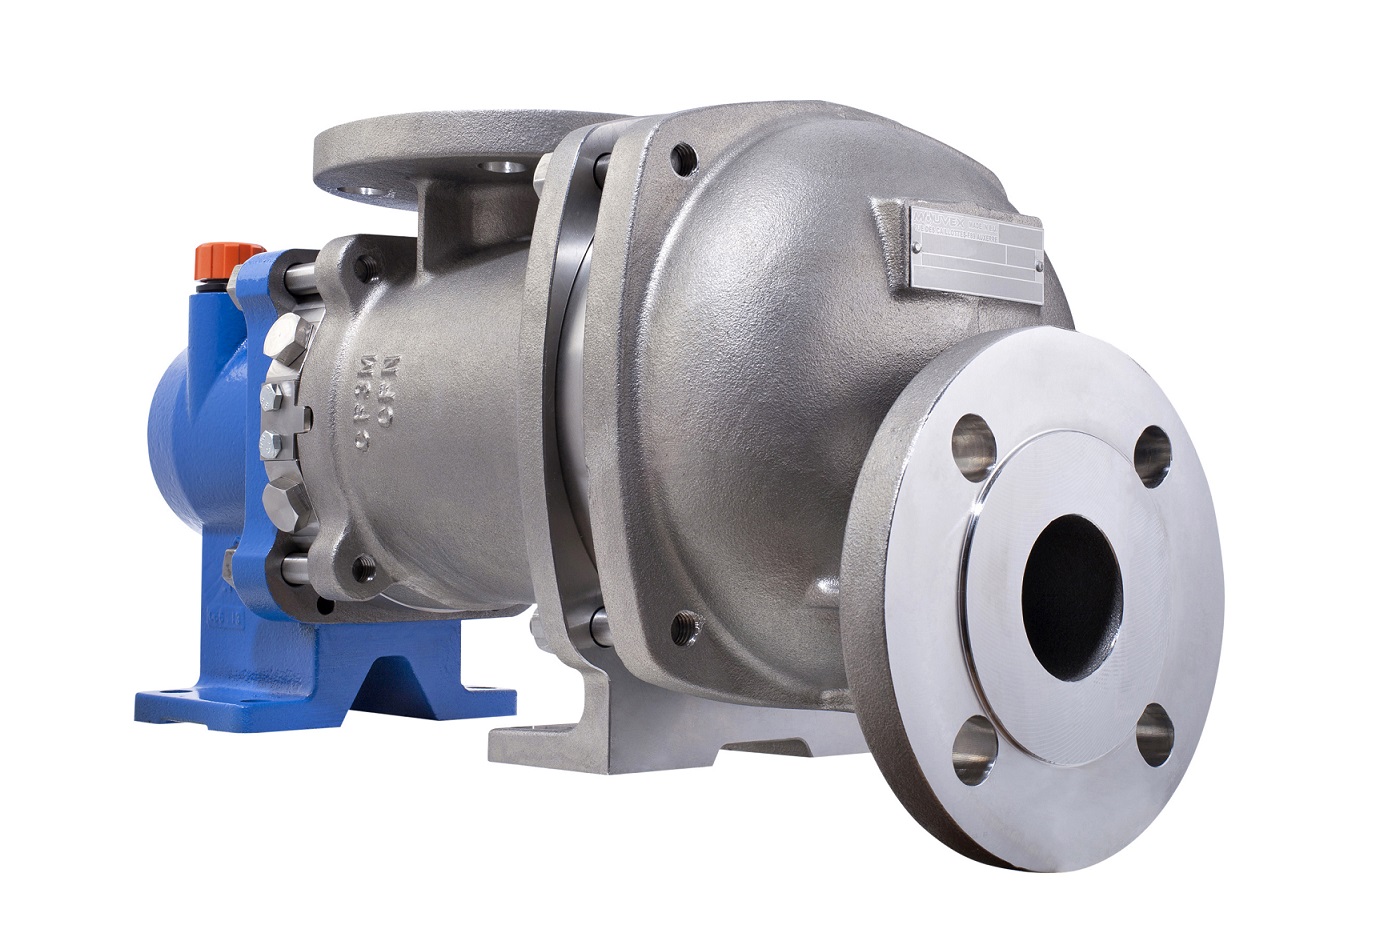 PSG SealLess Pump Technology to be Highlighted at ACHEMA